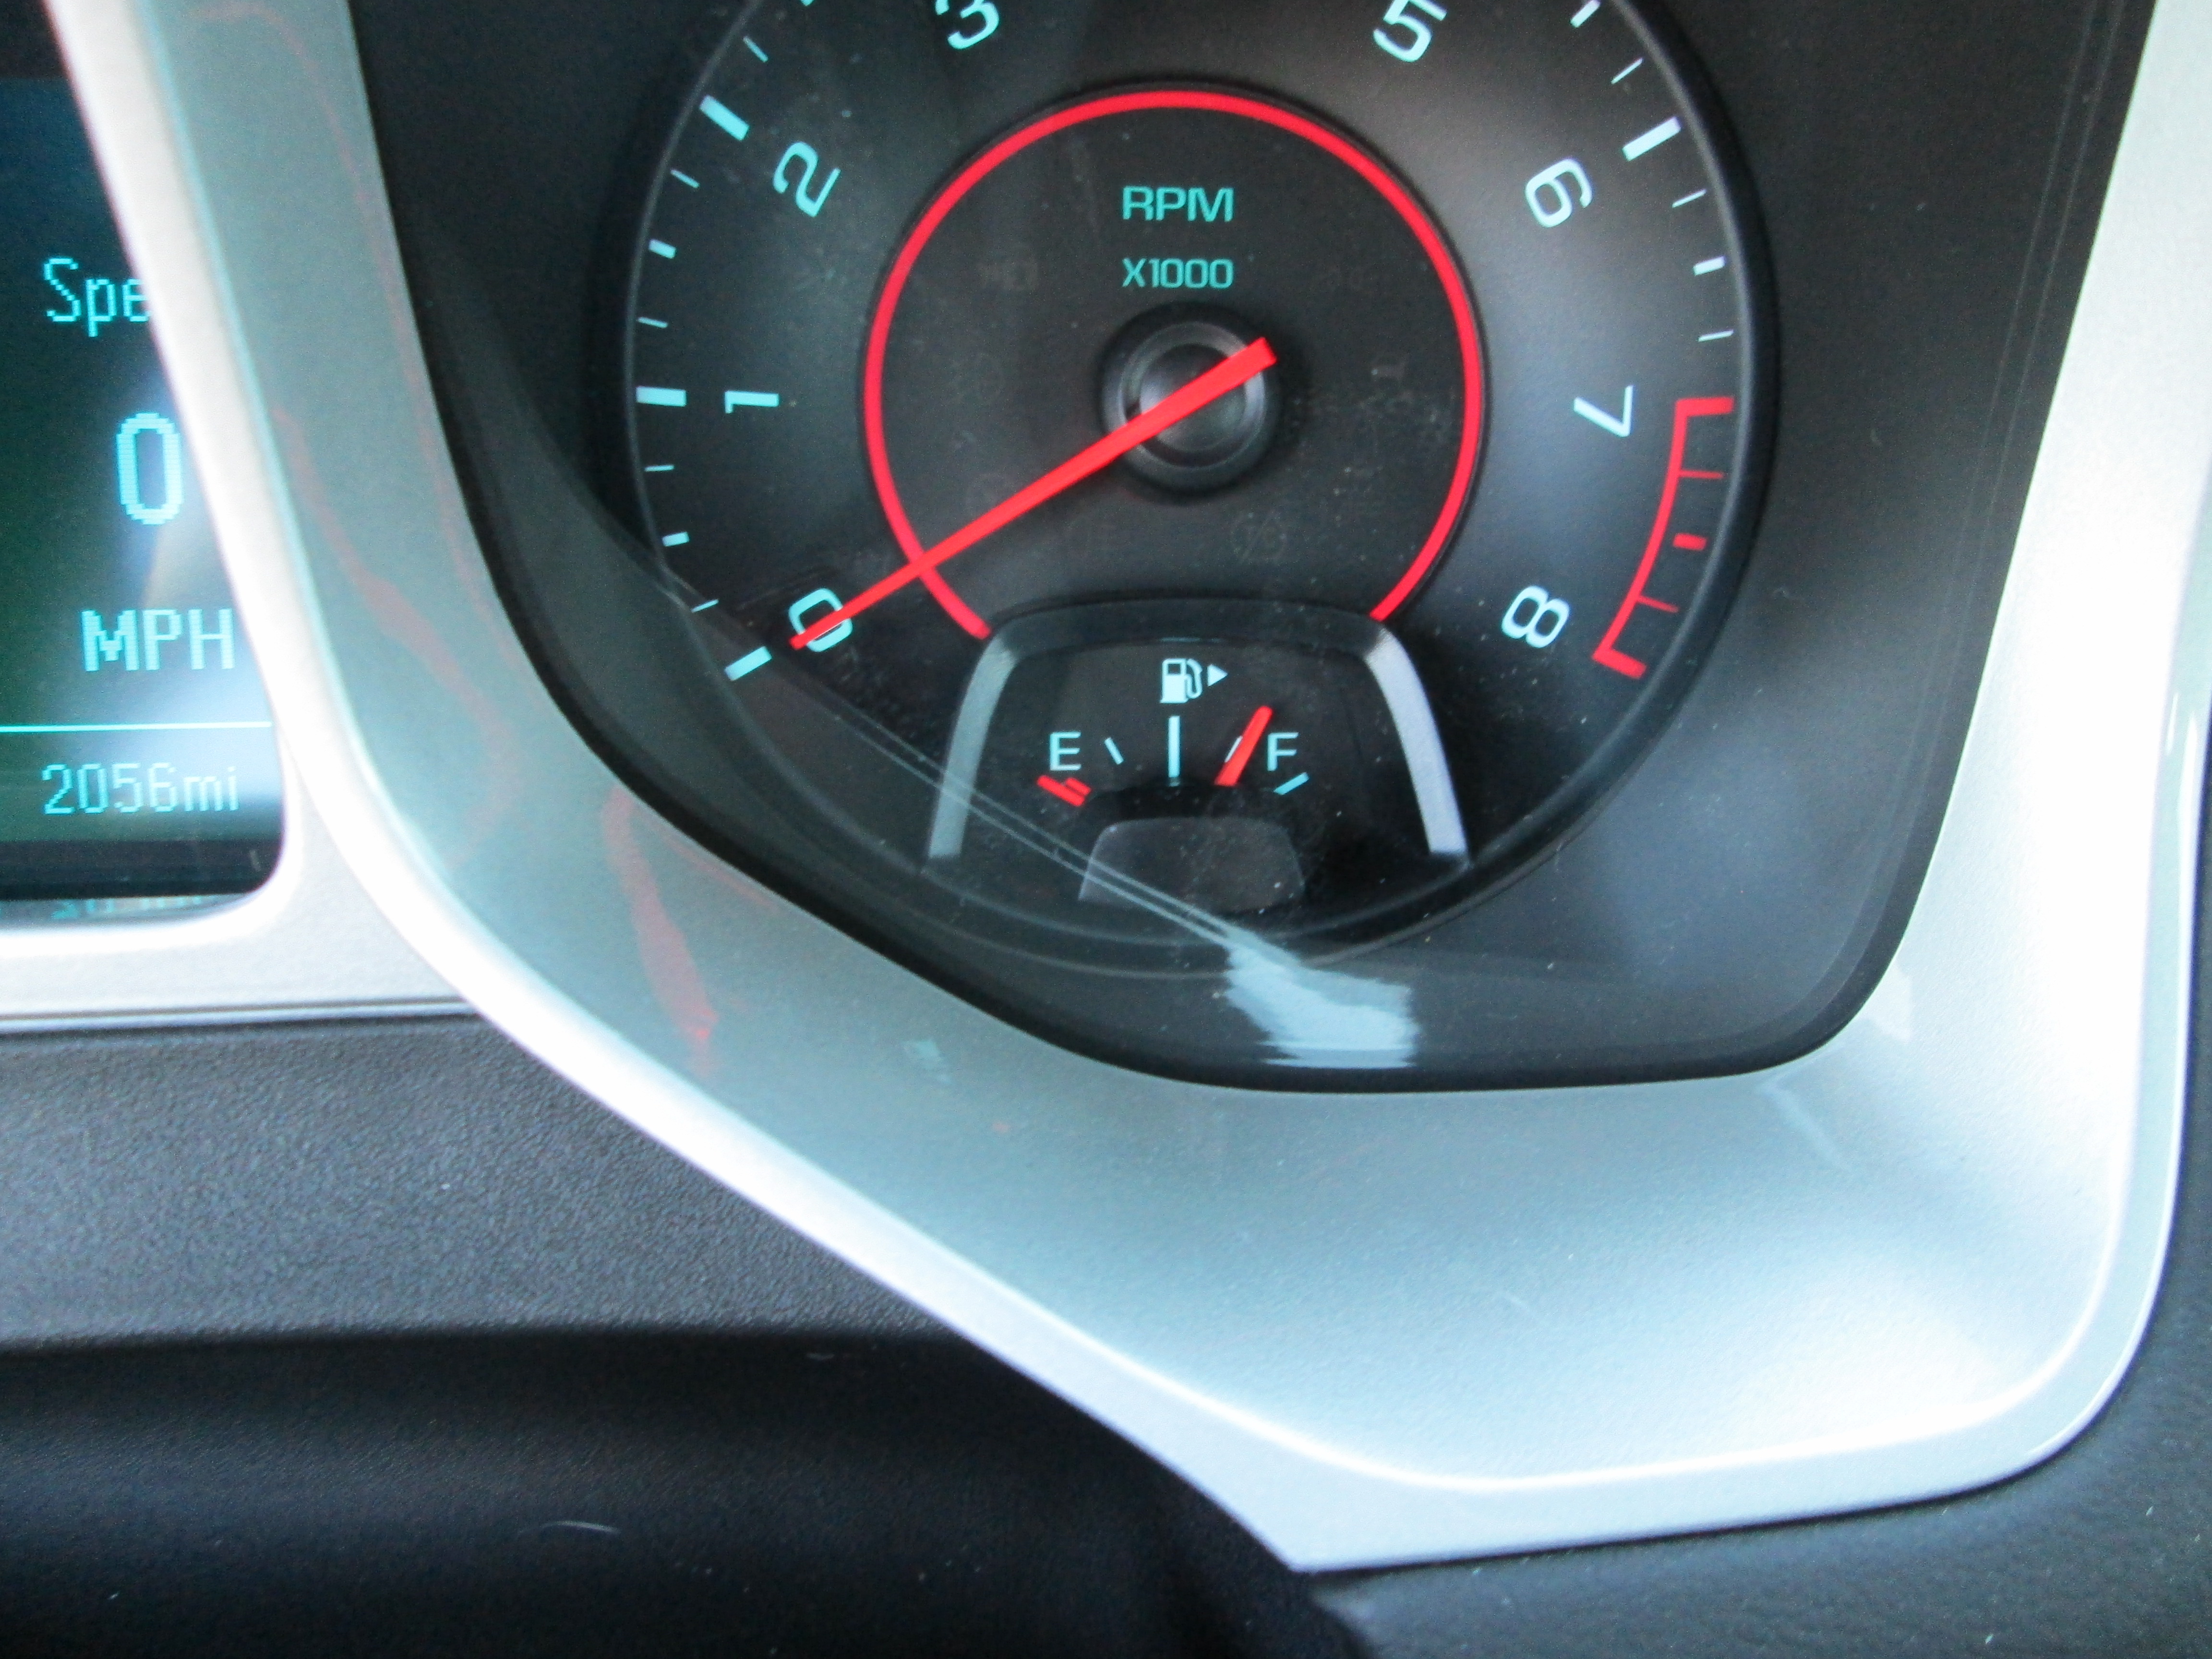 I asked to be able to take a picture of the fuel gauge as proof of the returned fuel level, and I was allowed.